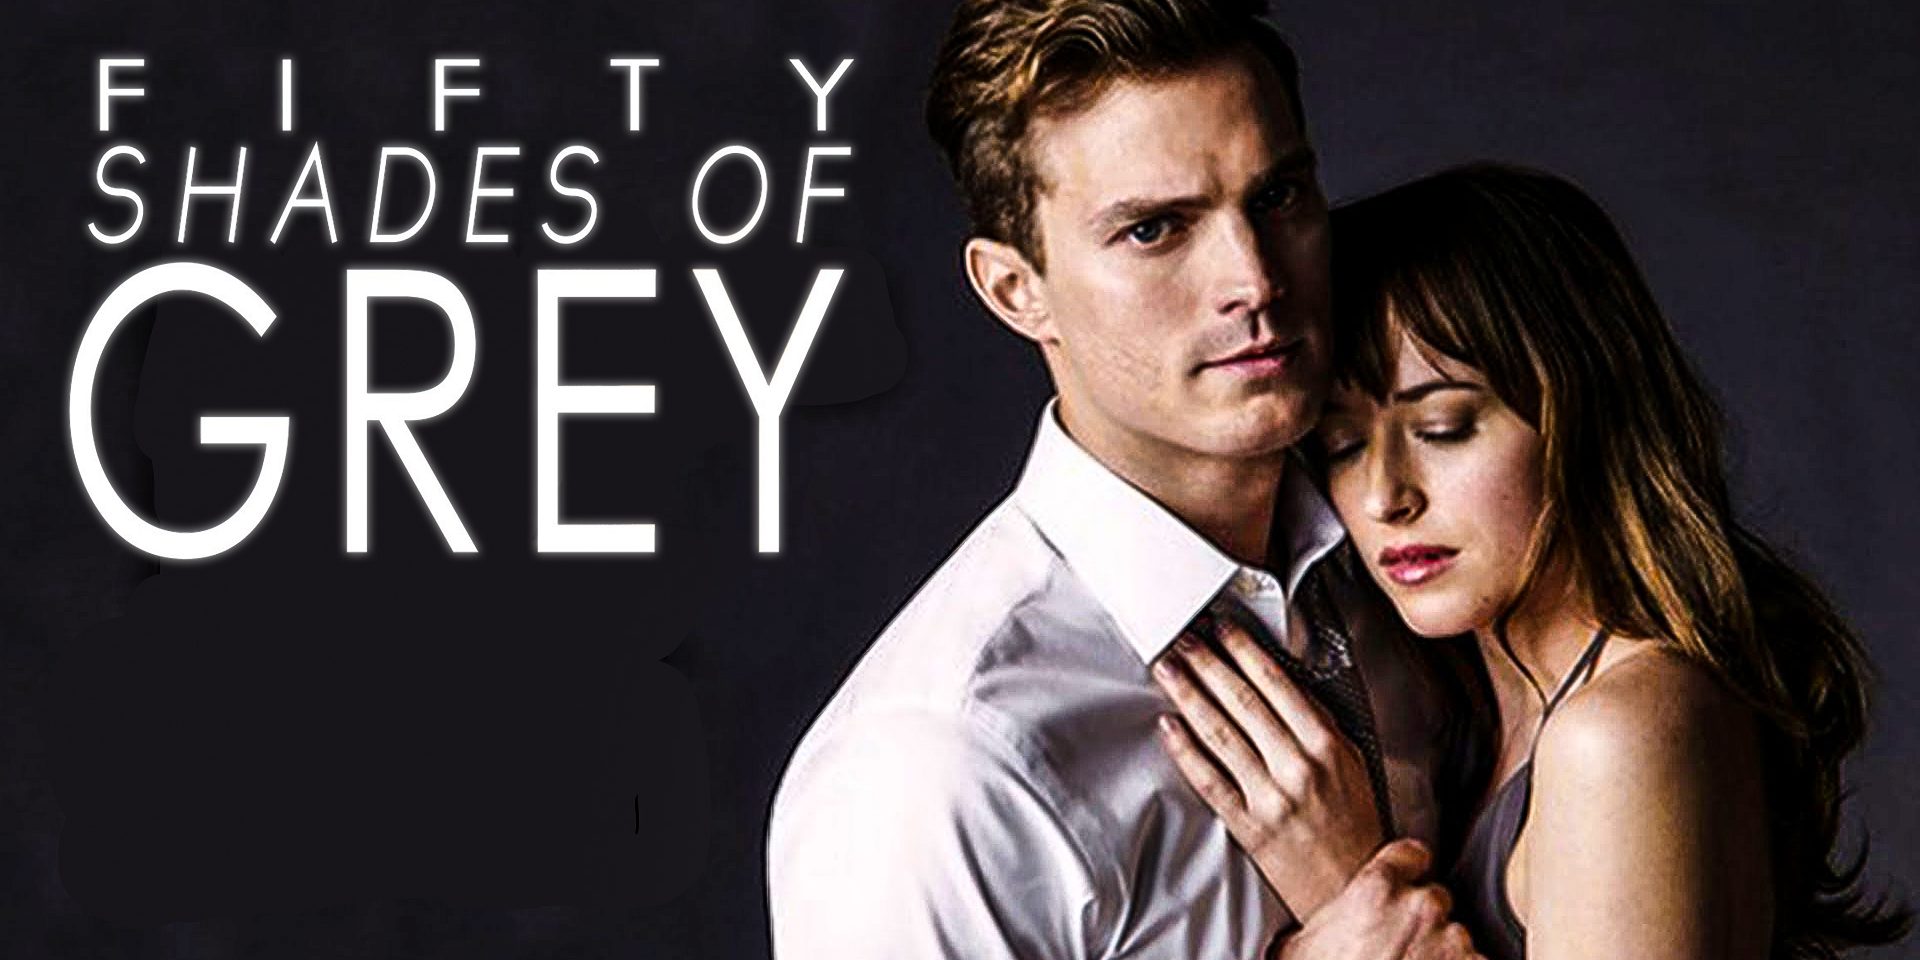 50 Shades Of Grey Porn Movie - Young people don't need 'porn literacy' classes about Fifty ...